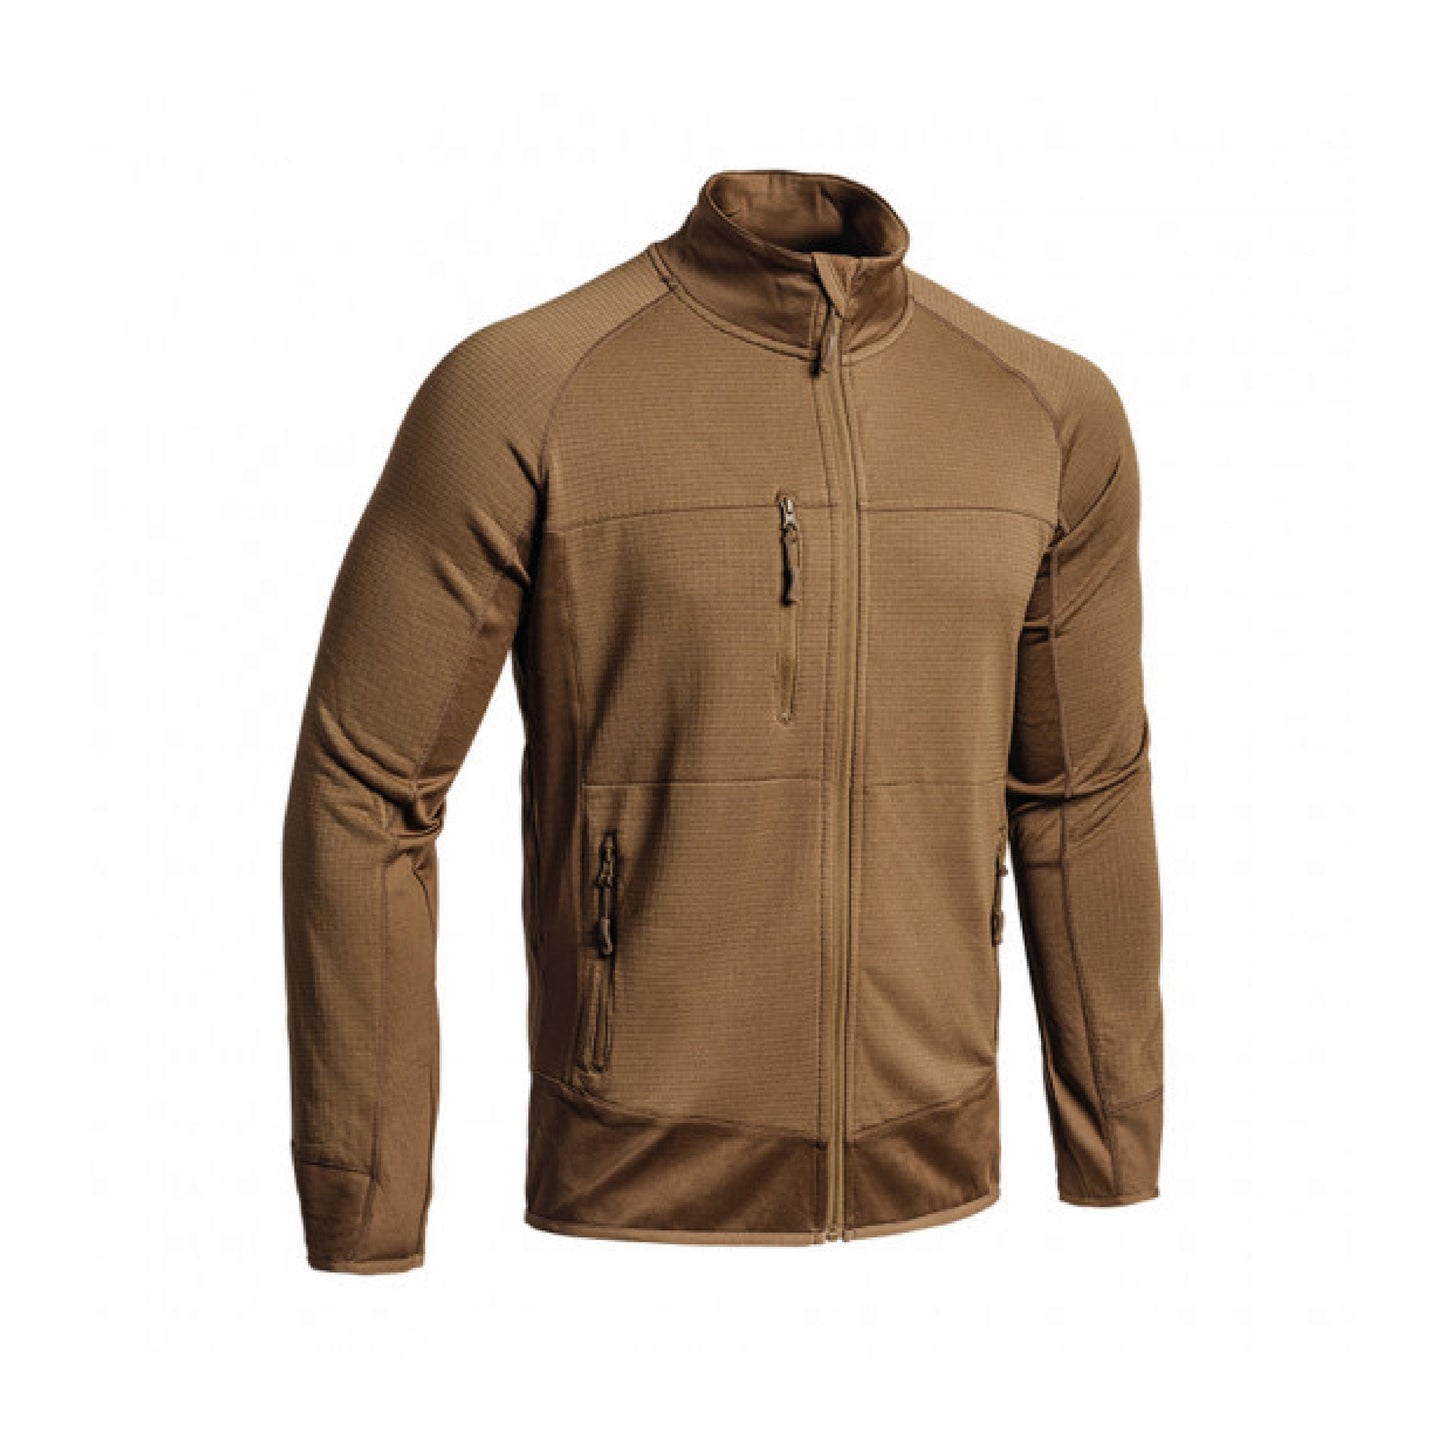 A10 Thermo Performer Basis-Jacke coyote